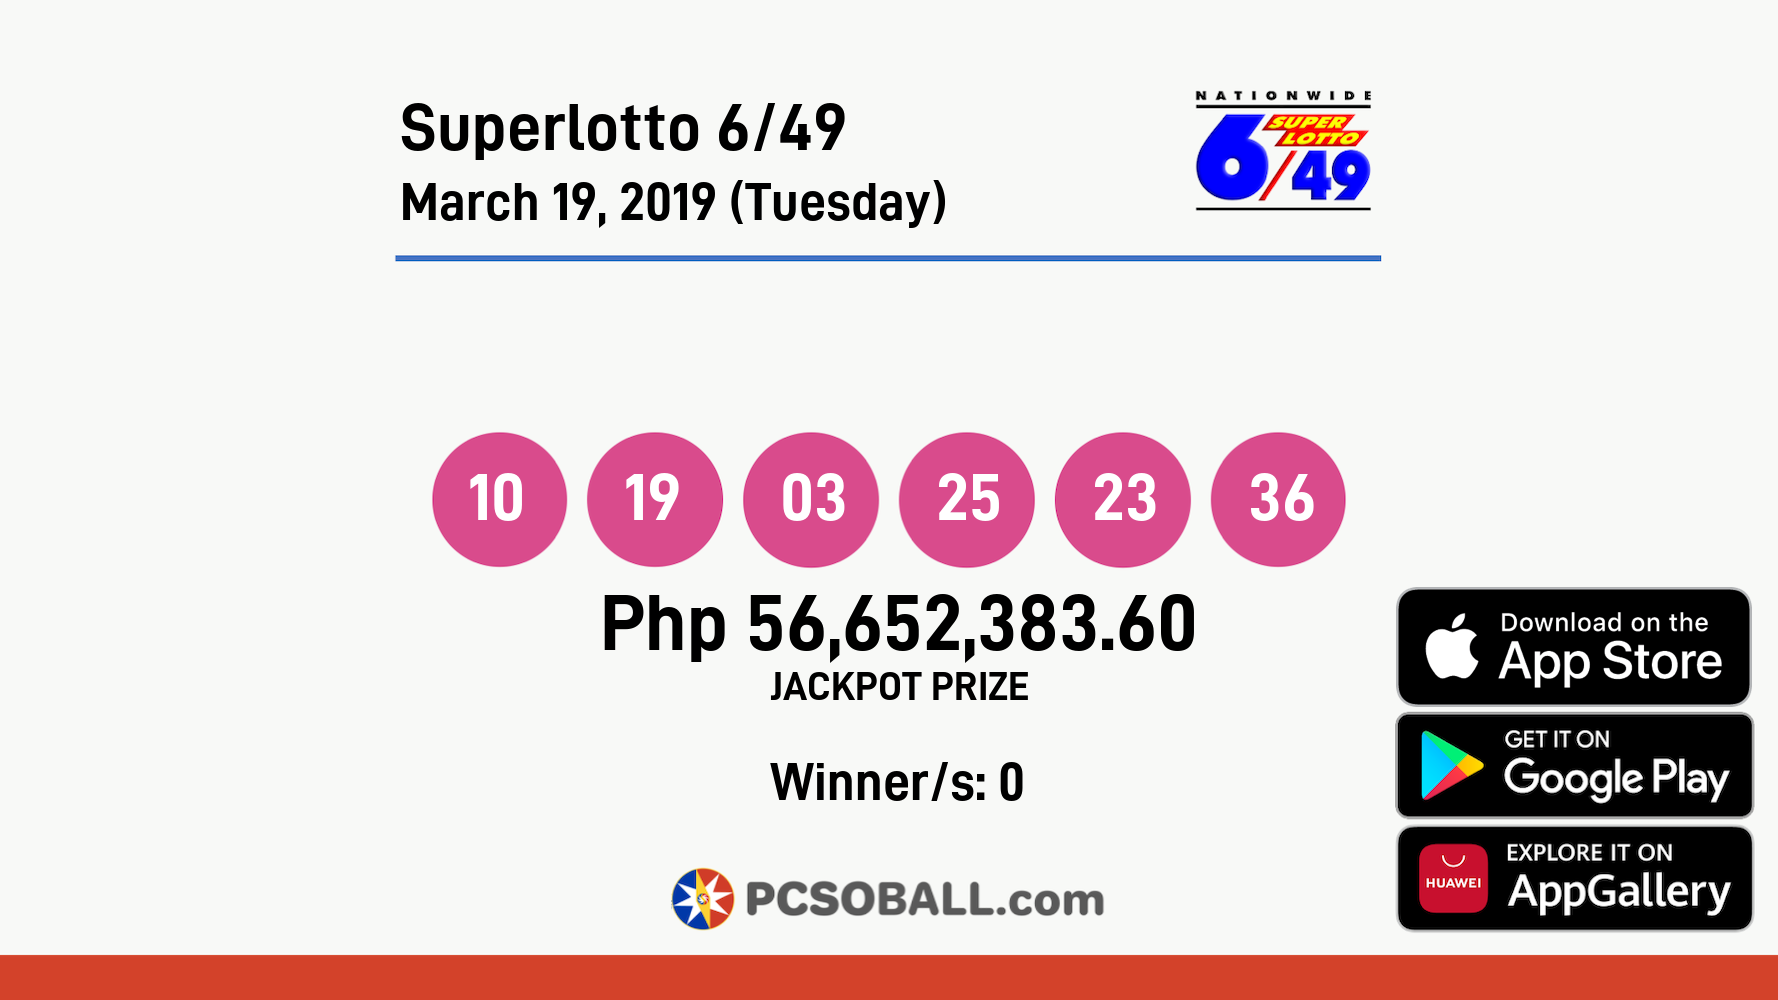 Superlotto 6/49 March 19, 2019 (Tuesday) Result